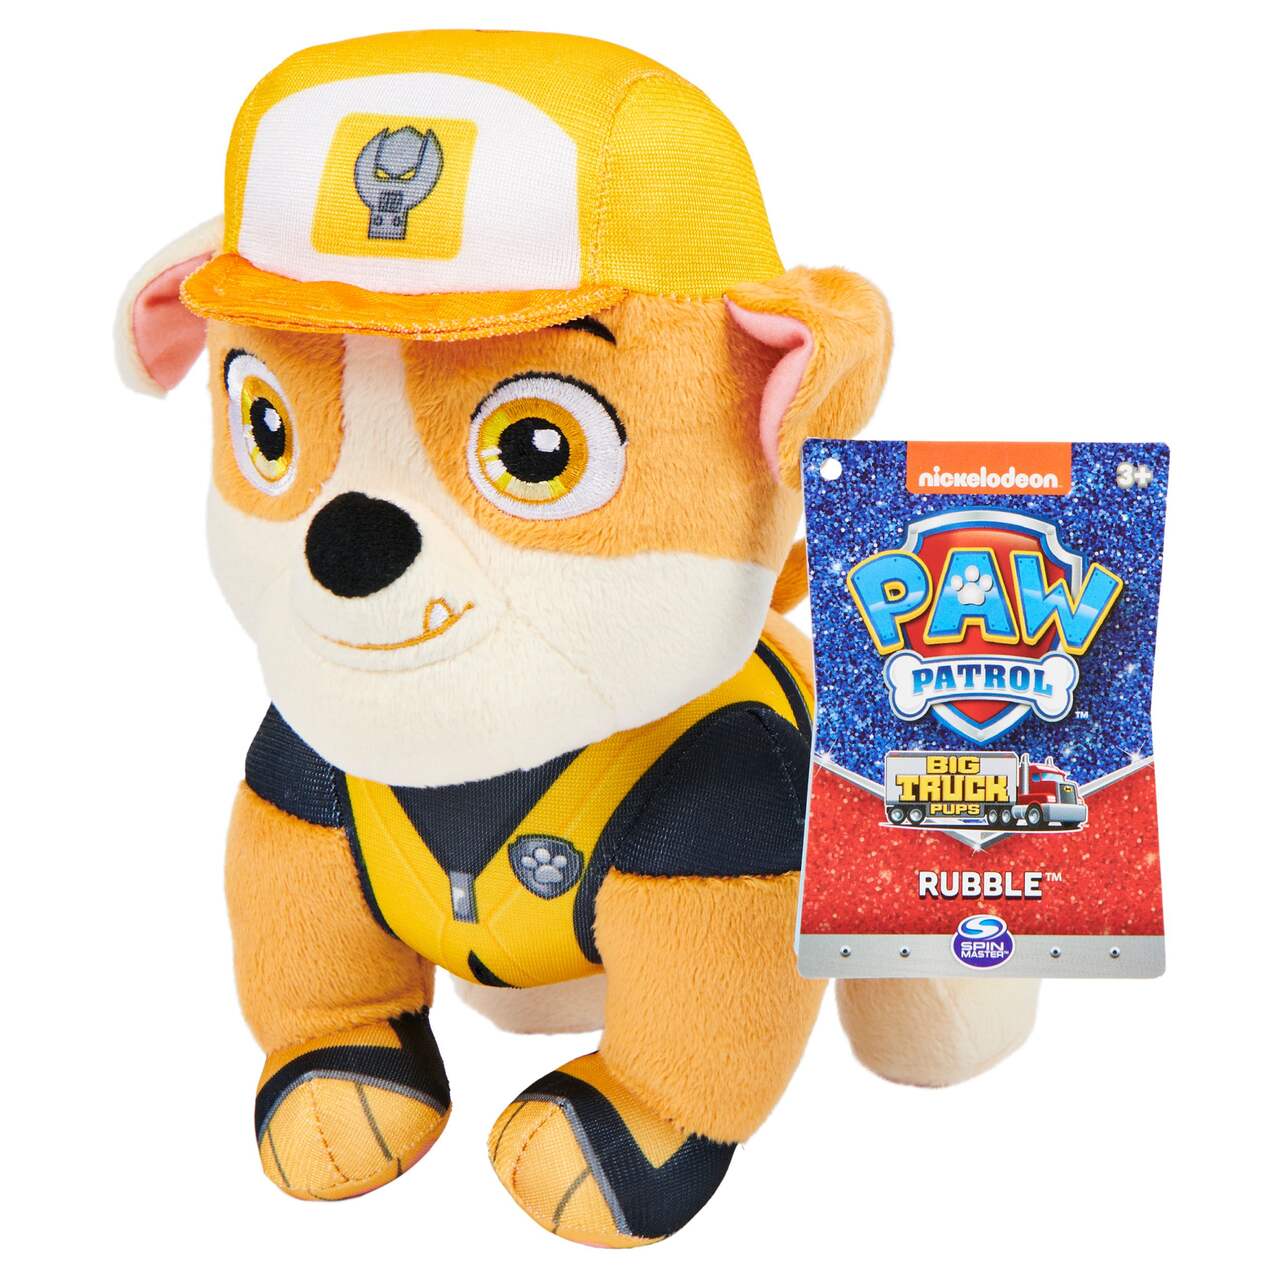 Paw Patrol Big Truck Pups Plush, 8-in, Ages 3+